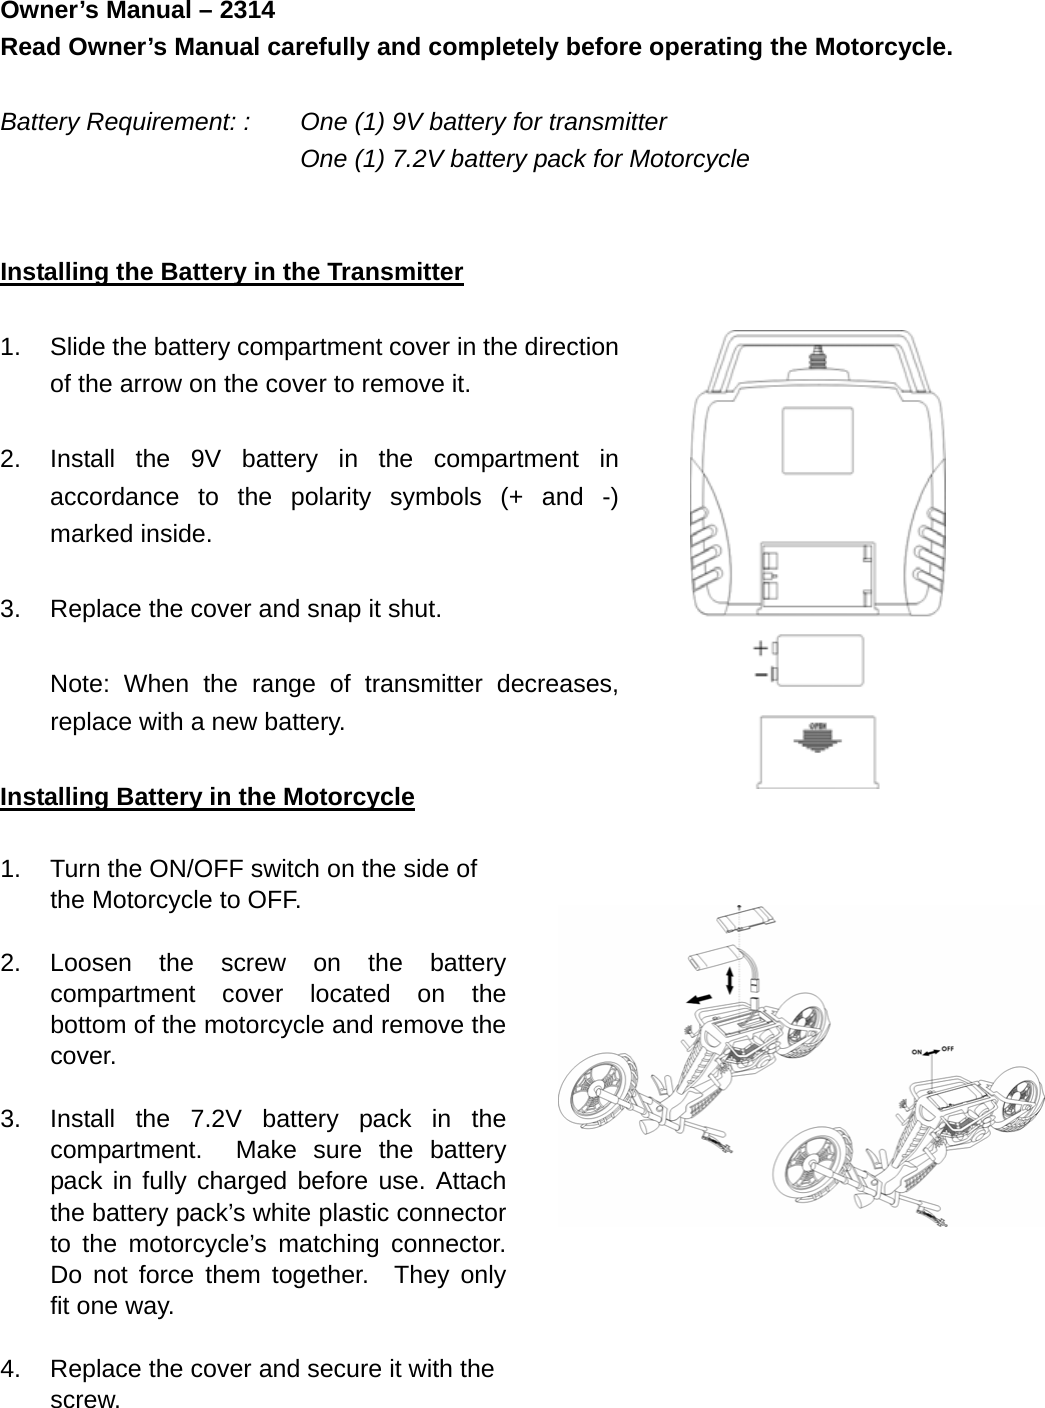 Owner’s Manual – 2314   Read Owner’s Manual carefully and completely before operating the Motorcycle.  Battery Requirement: :    One (1) 9V battery for transmitter       One (1) 7.2V battery pack for Motorcycle   Installing the Battery in the Transmitter  1.  Slide the battery compartment cover in the direction of the arrow on the cover to remove it.  2.  Install the 9V battery in the compartment in accordance to the polarity symbols (+ and -) marked inside.  3.  Replace the cover and snap it shut.  Note: When the range of transmitter decreases,   replace with a new battery.  Installing Battery in the Motorcycle  1.  Turn the ON/OFF switch on the side of the Motorcycle to OFF.  2. Loosen the screw on the battery compartment cover located on the bottom of the motorcycle and remove the cover.  3.  Install the 7.2V battery pack in the compartment.  Make sure the battery pack in fully charged before use. Attach the battery pack’s white plastic connector to the motorcycle’s matching connector.  Do not force them together.  They only fit one way.  4.  Replace the cover and secure it with the screw.     